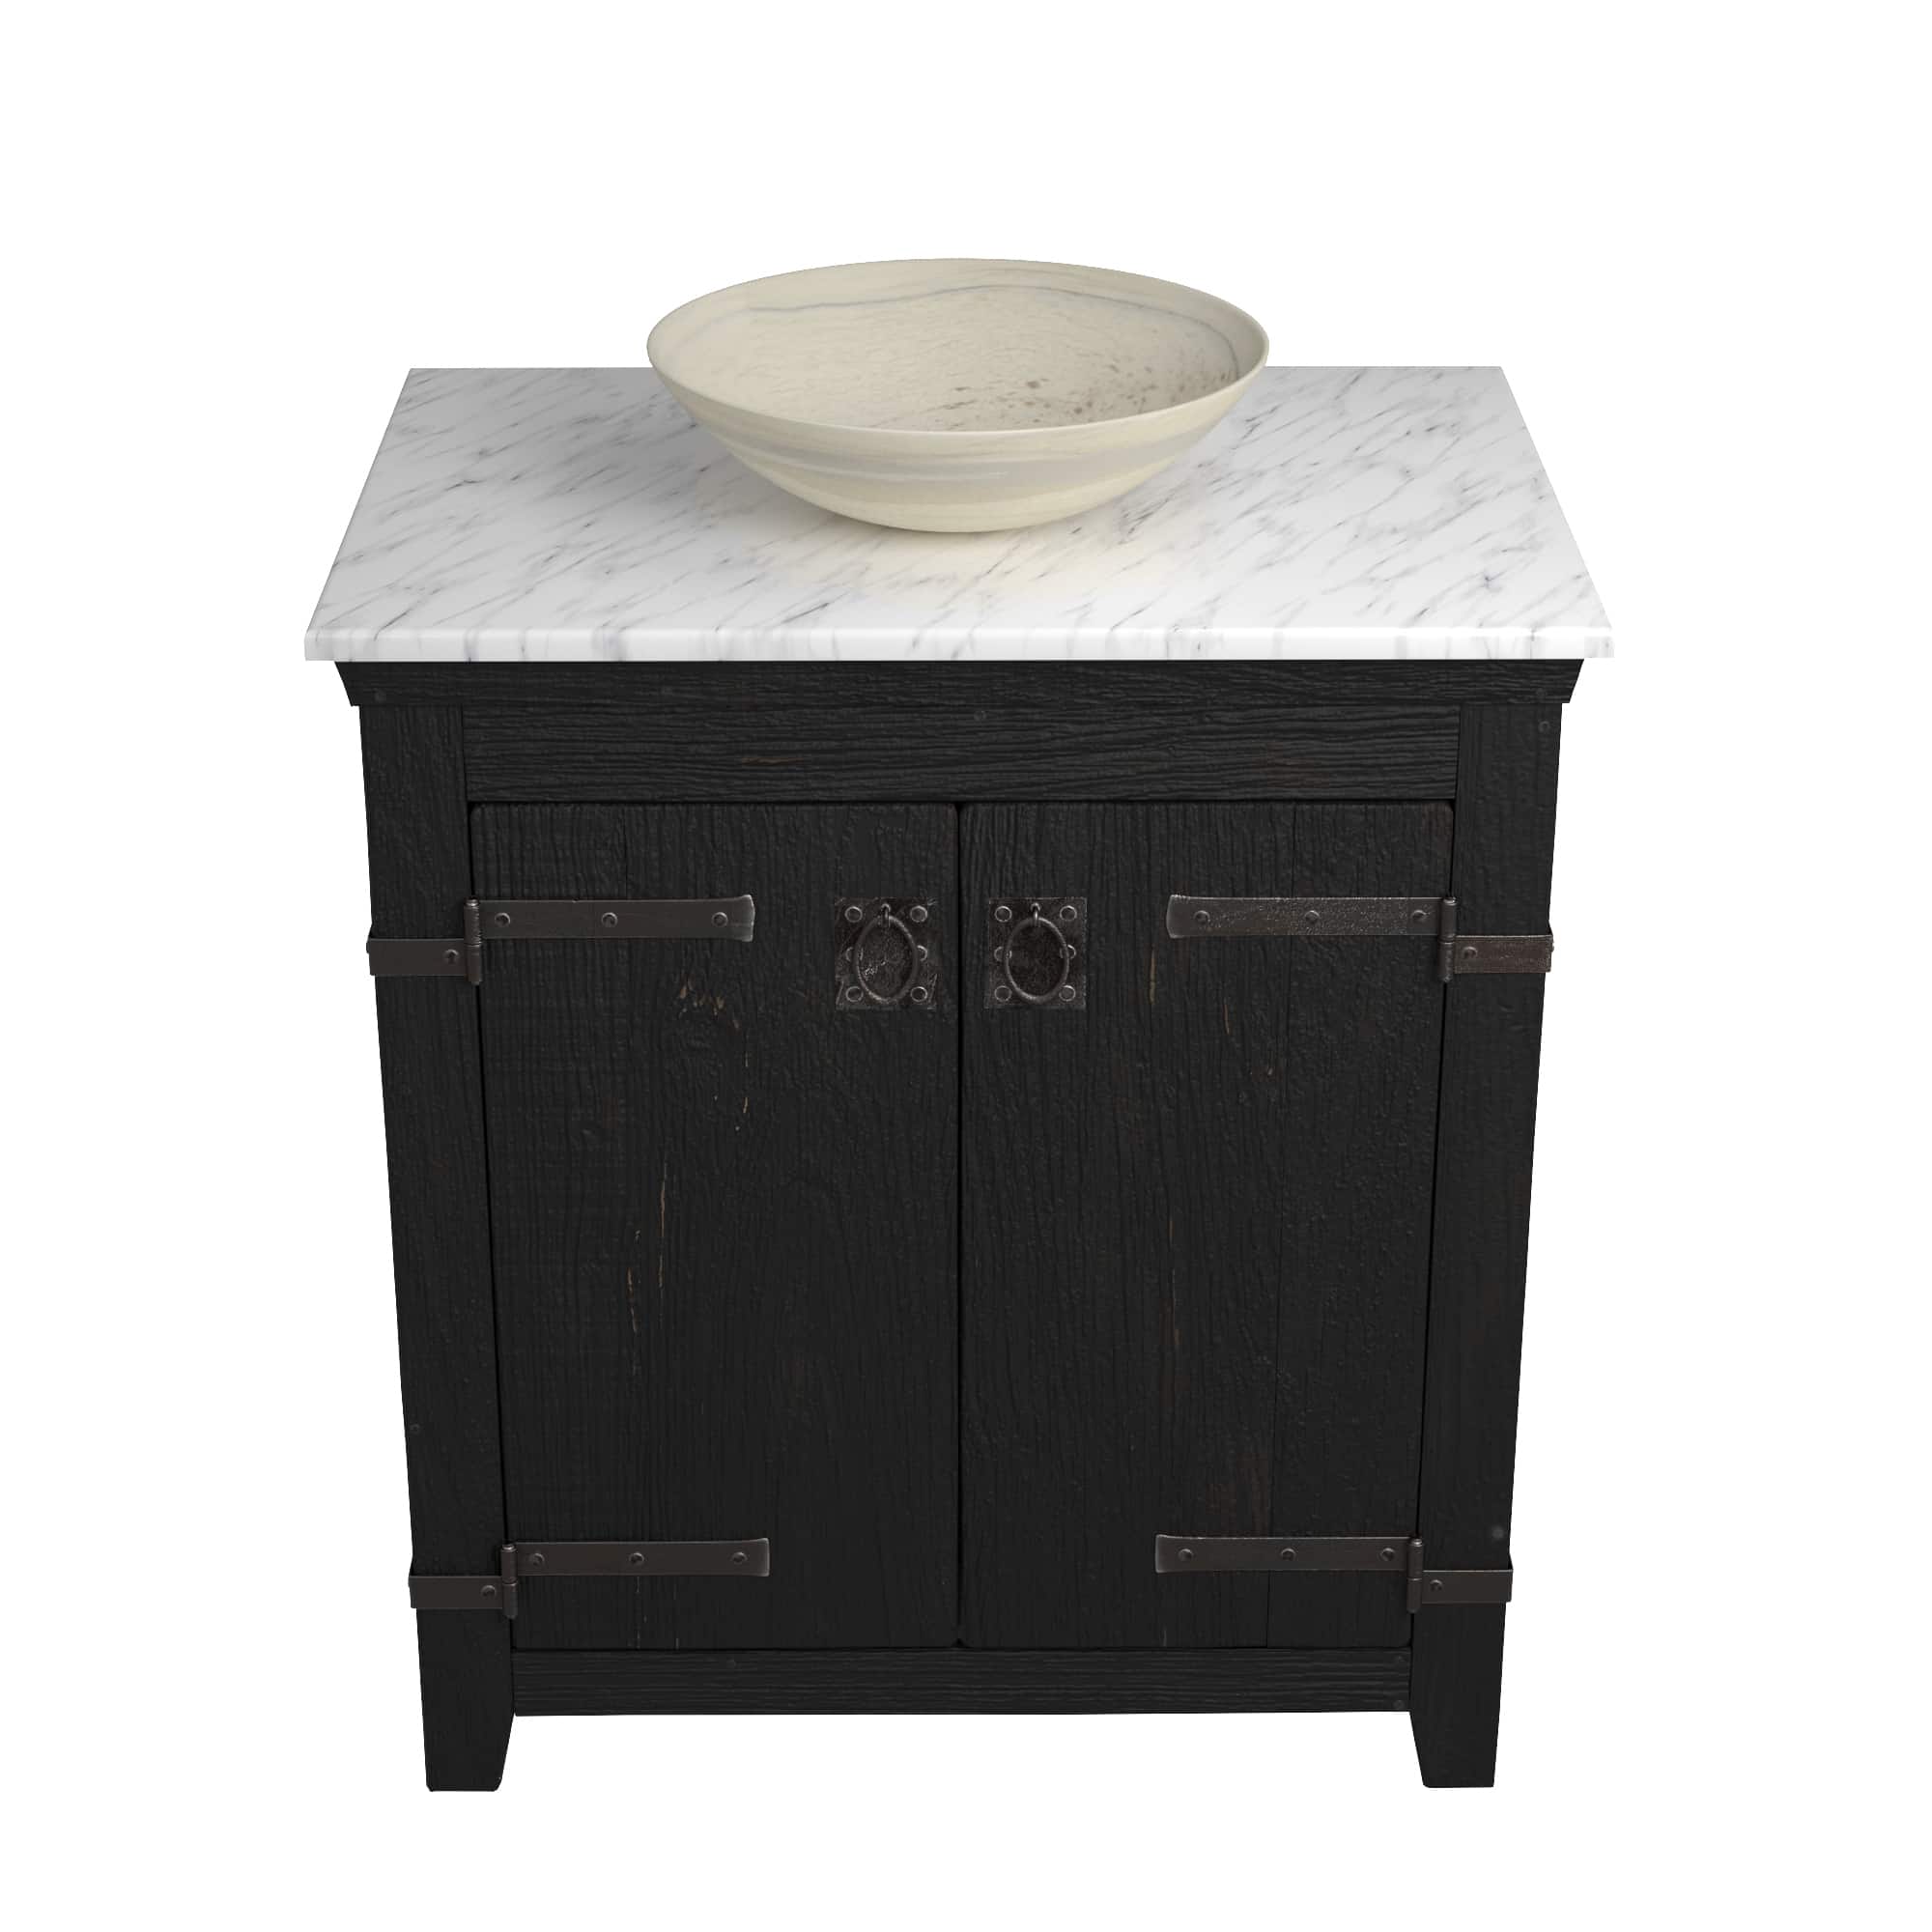 Native Trails 30" Americana Vanity in Anvil with Carrara Marble Top and Verona in Beachcomber, Single Faucet Hole, BND30-VB-CT-MG-085